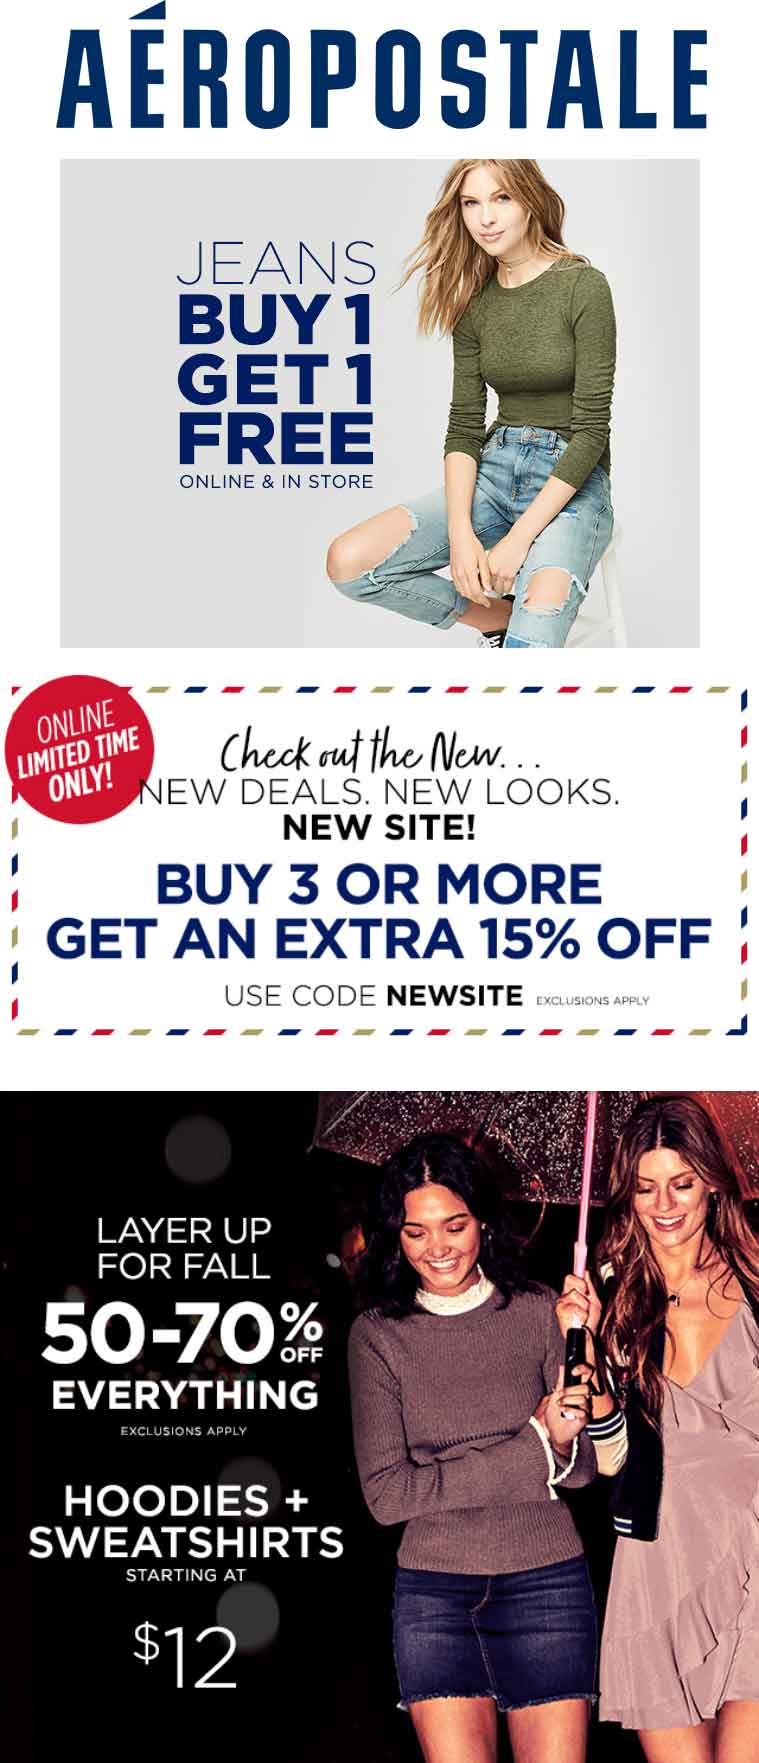 Aeropostale Coupon April 2024 Second jeans free at Aeropostale, ditto online + 15% off 3 items via promo code NEWSITE